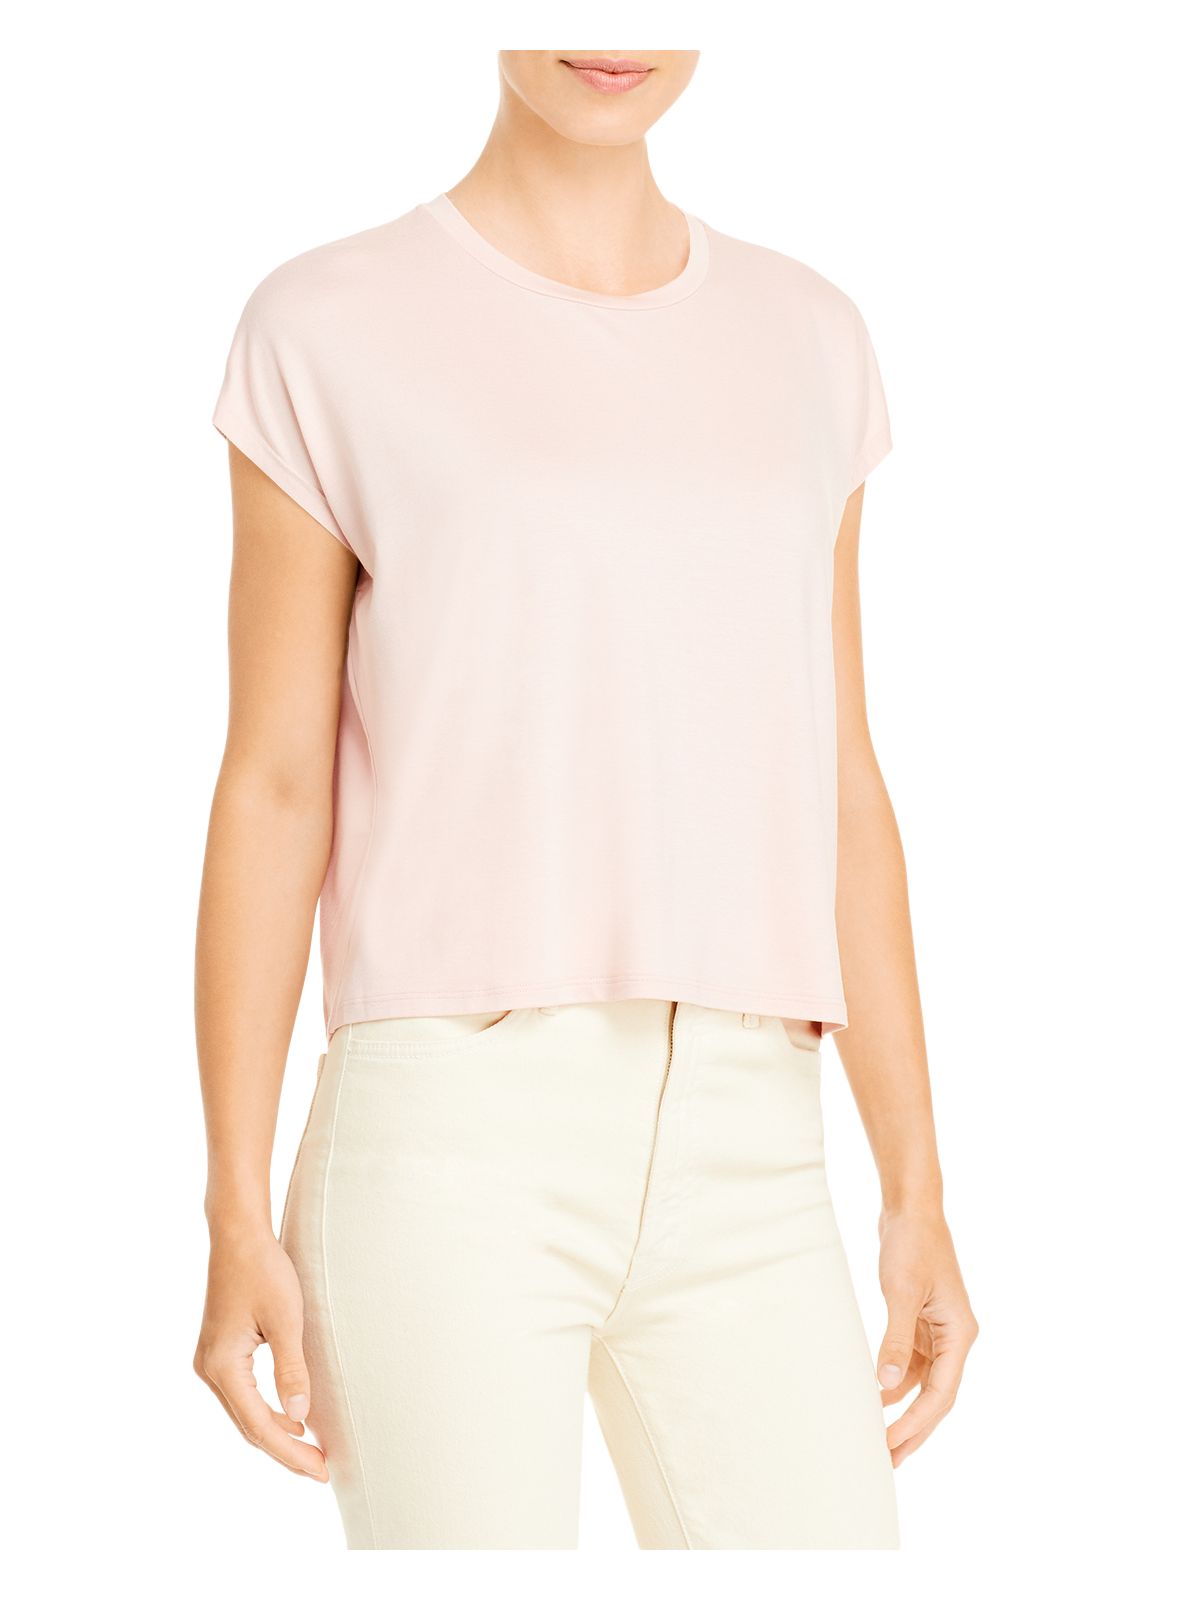 EILEEN FISHER Womens Pink Stretch Ruched Relaxed Fit Cap Sleeve Crew Neck T-Shirt XS